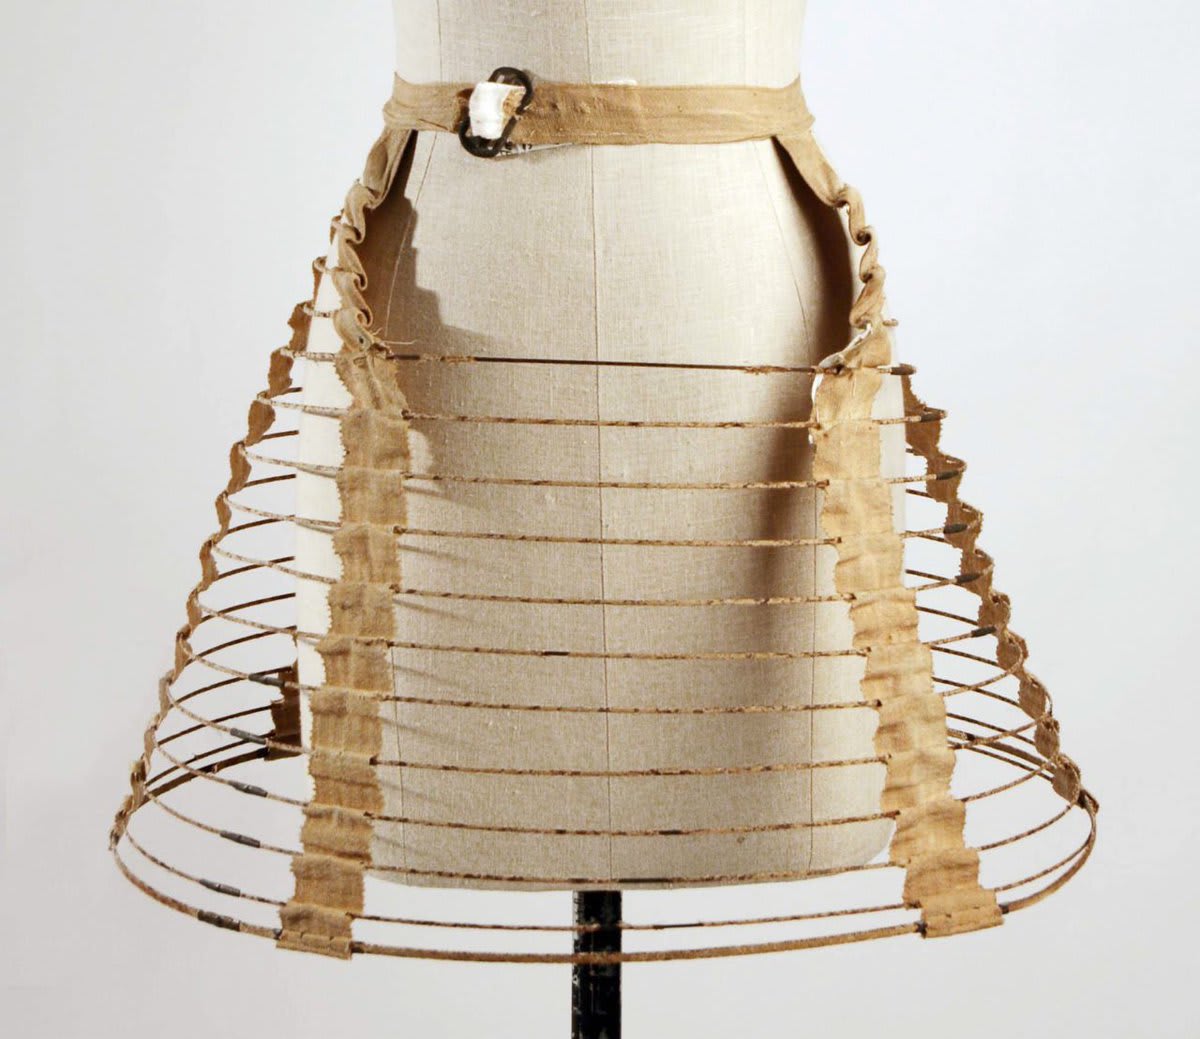 The cage crinoline is a hooped cage worn under petticoats in the 1850s/1860s to stiffen and extend the skirt. It was one of the first mass-produced fashions and was widely adopted by all societal classes. Read more at the link below!